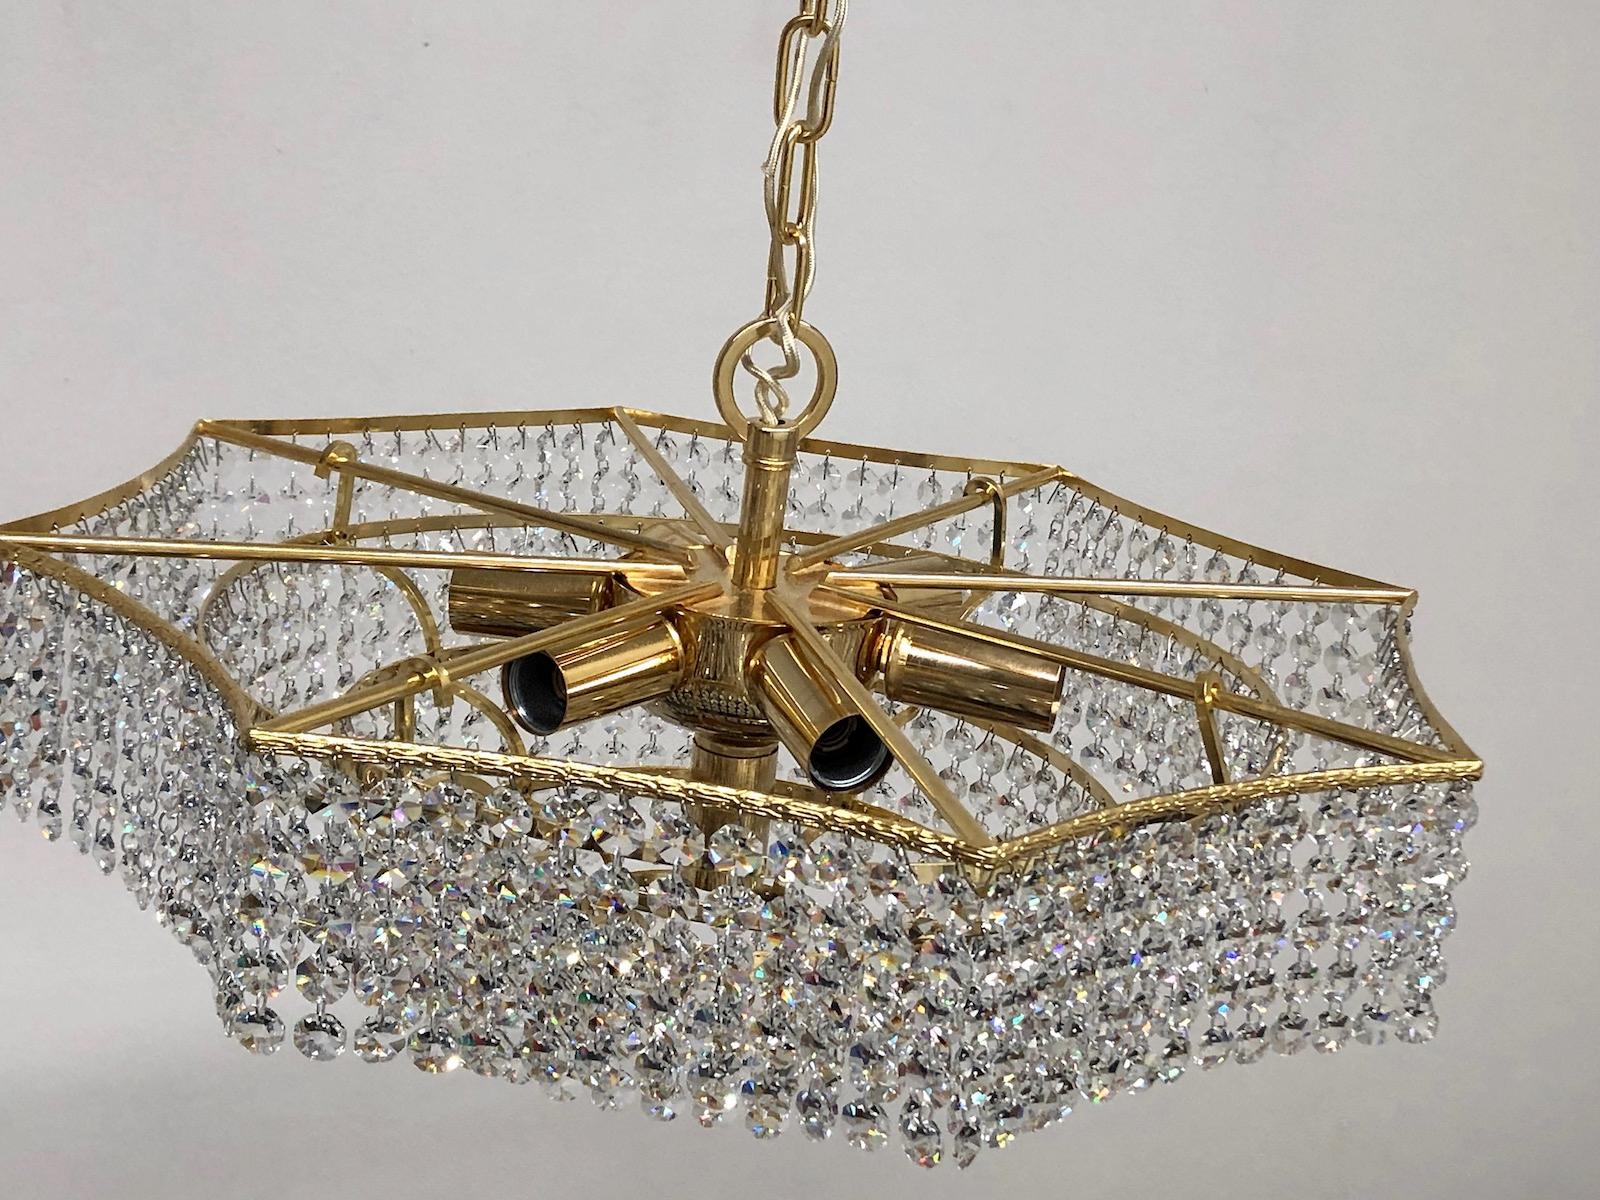 Brass and Crystal Glass Waterfall Chandelier, Richard Essig, Germany, 1960s For Sale 3